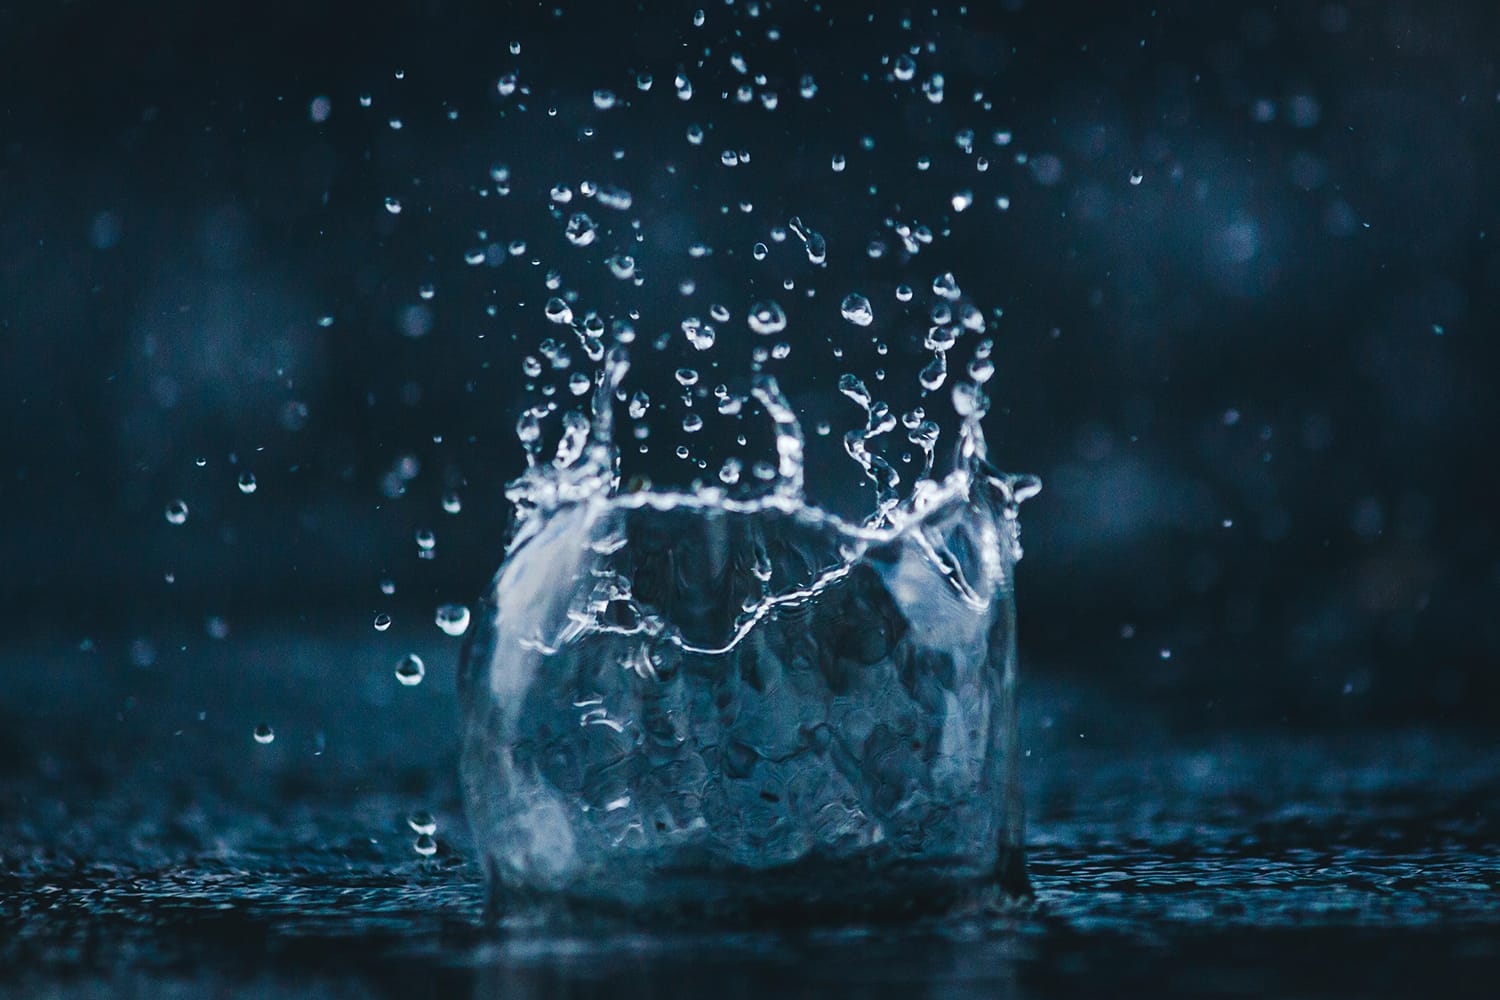 An Introduction To Splash Water Photography Contrastly